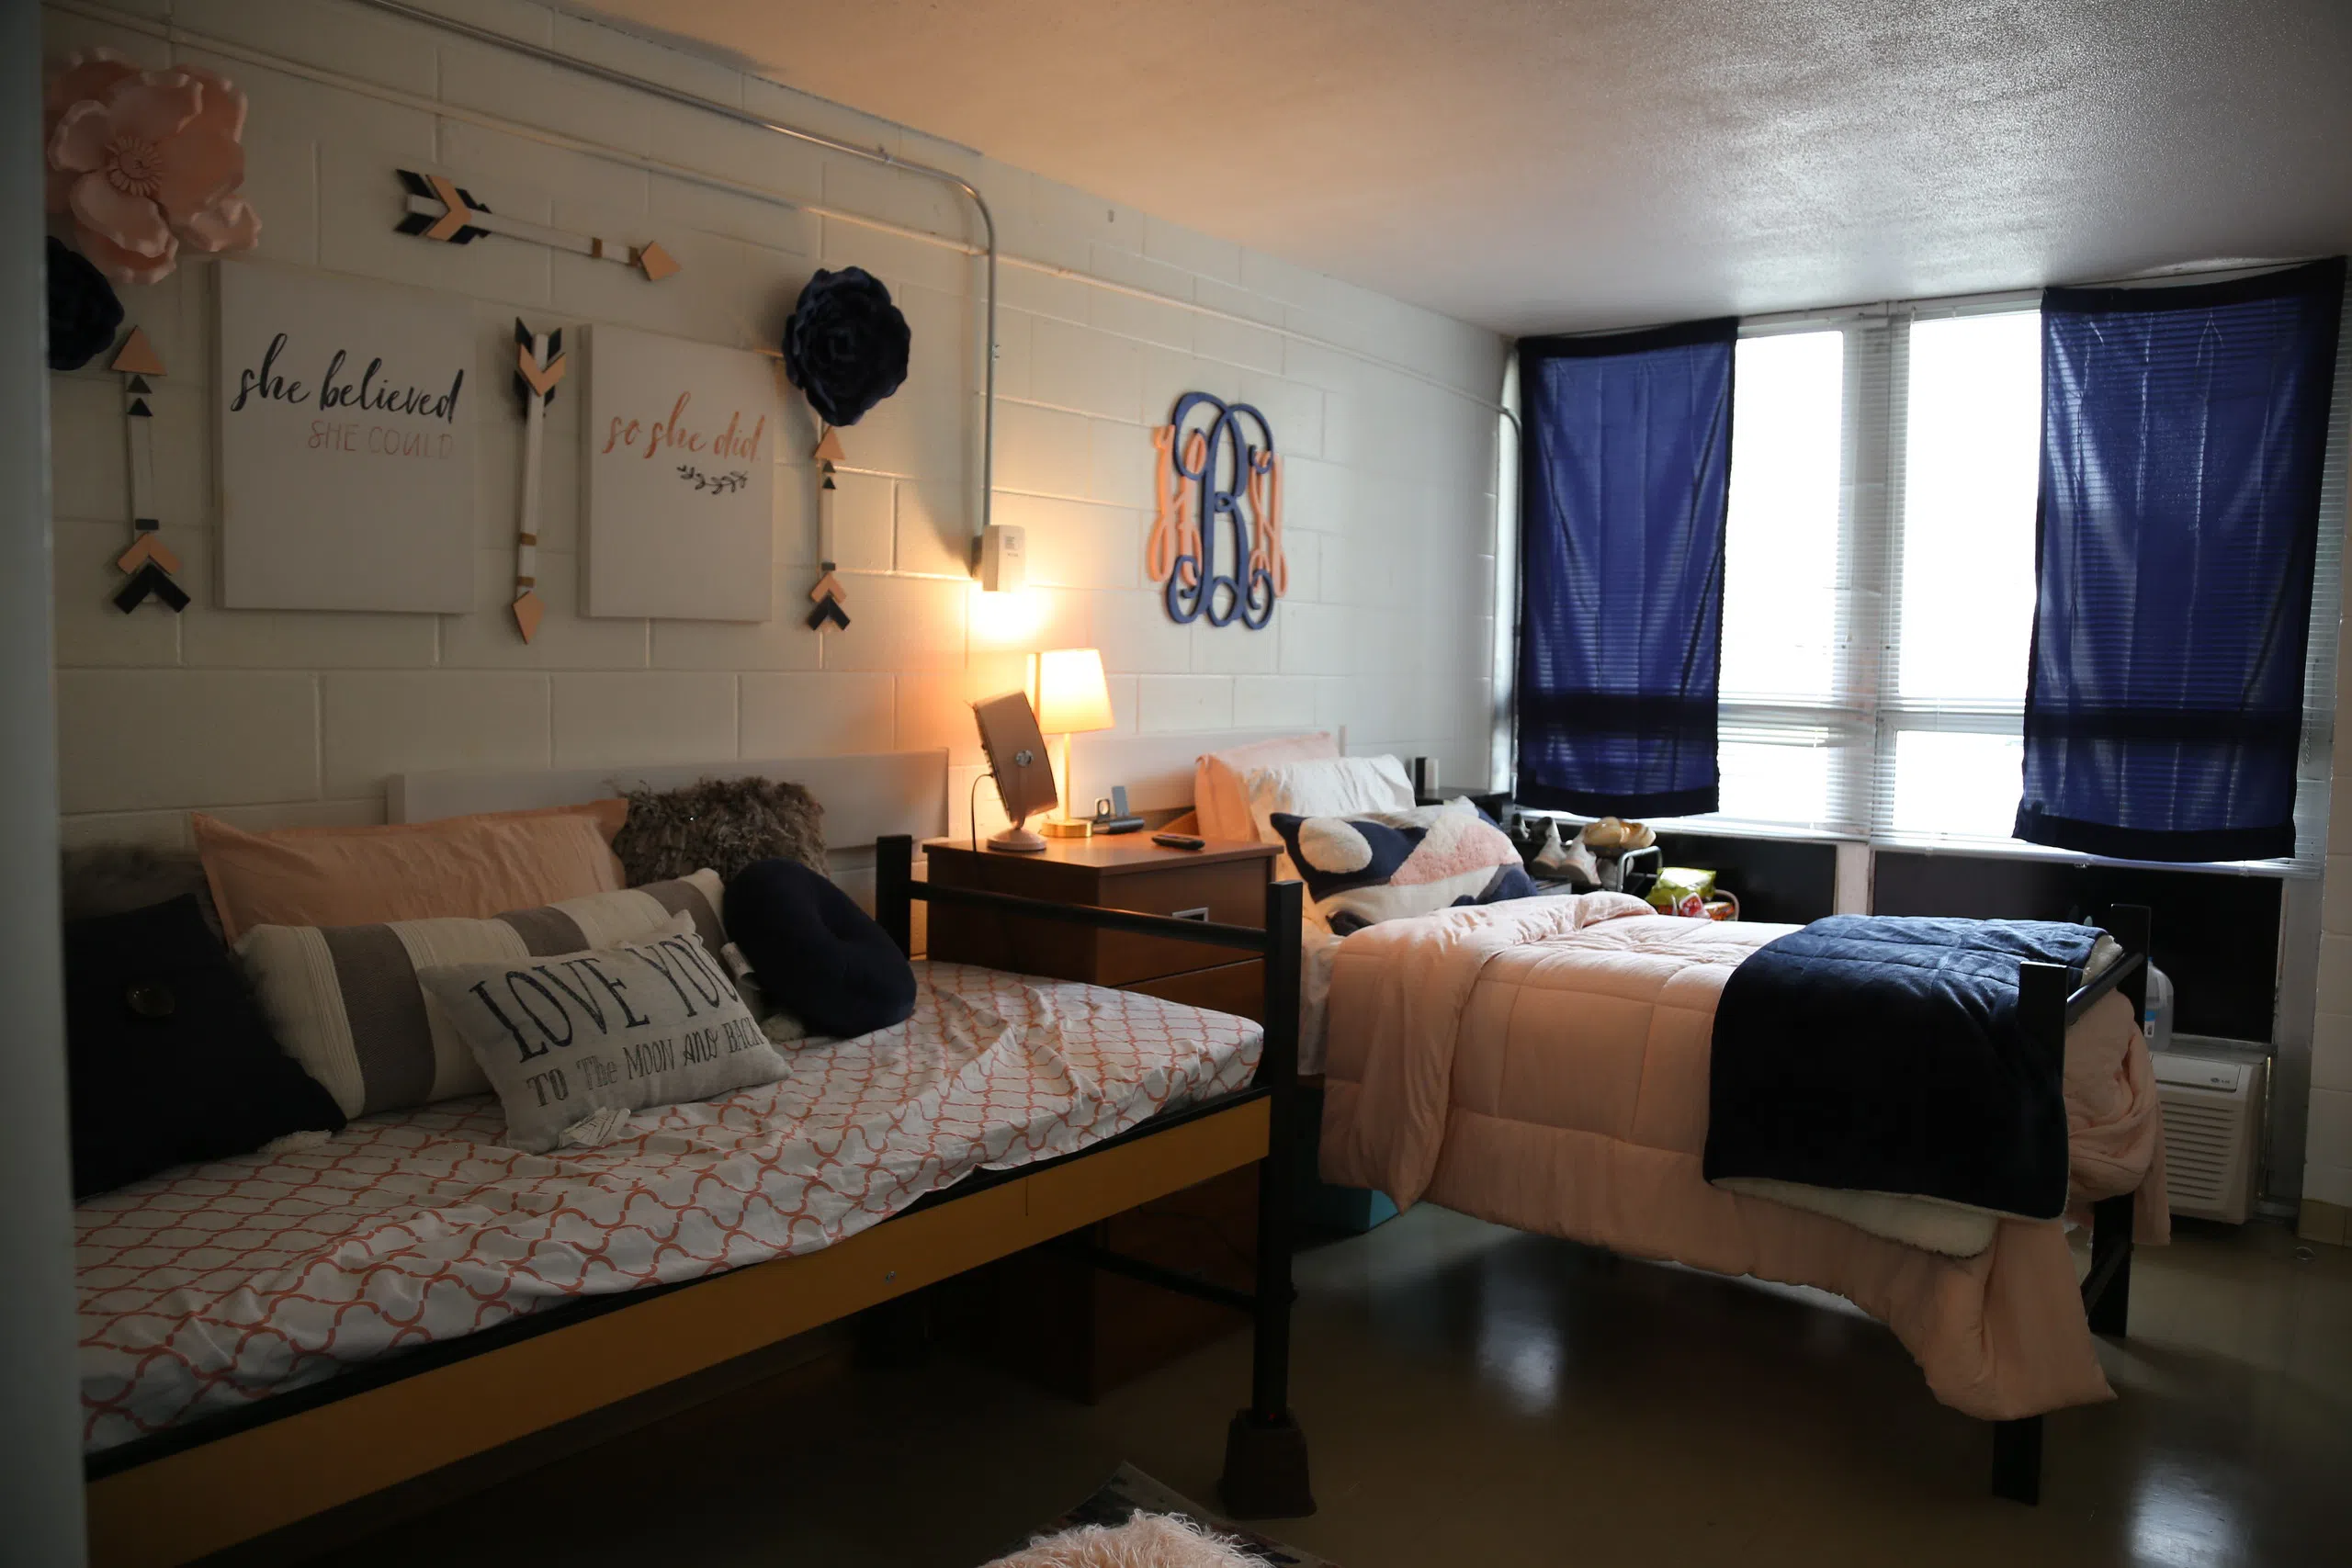 Dorm room interior with bed and window. 